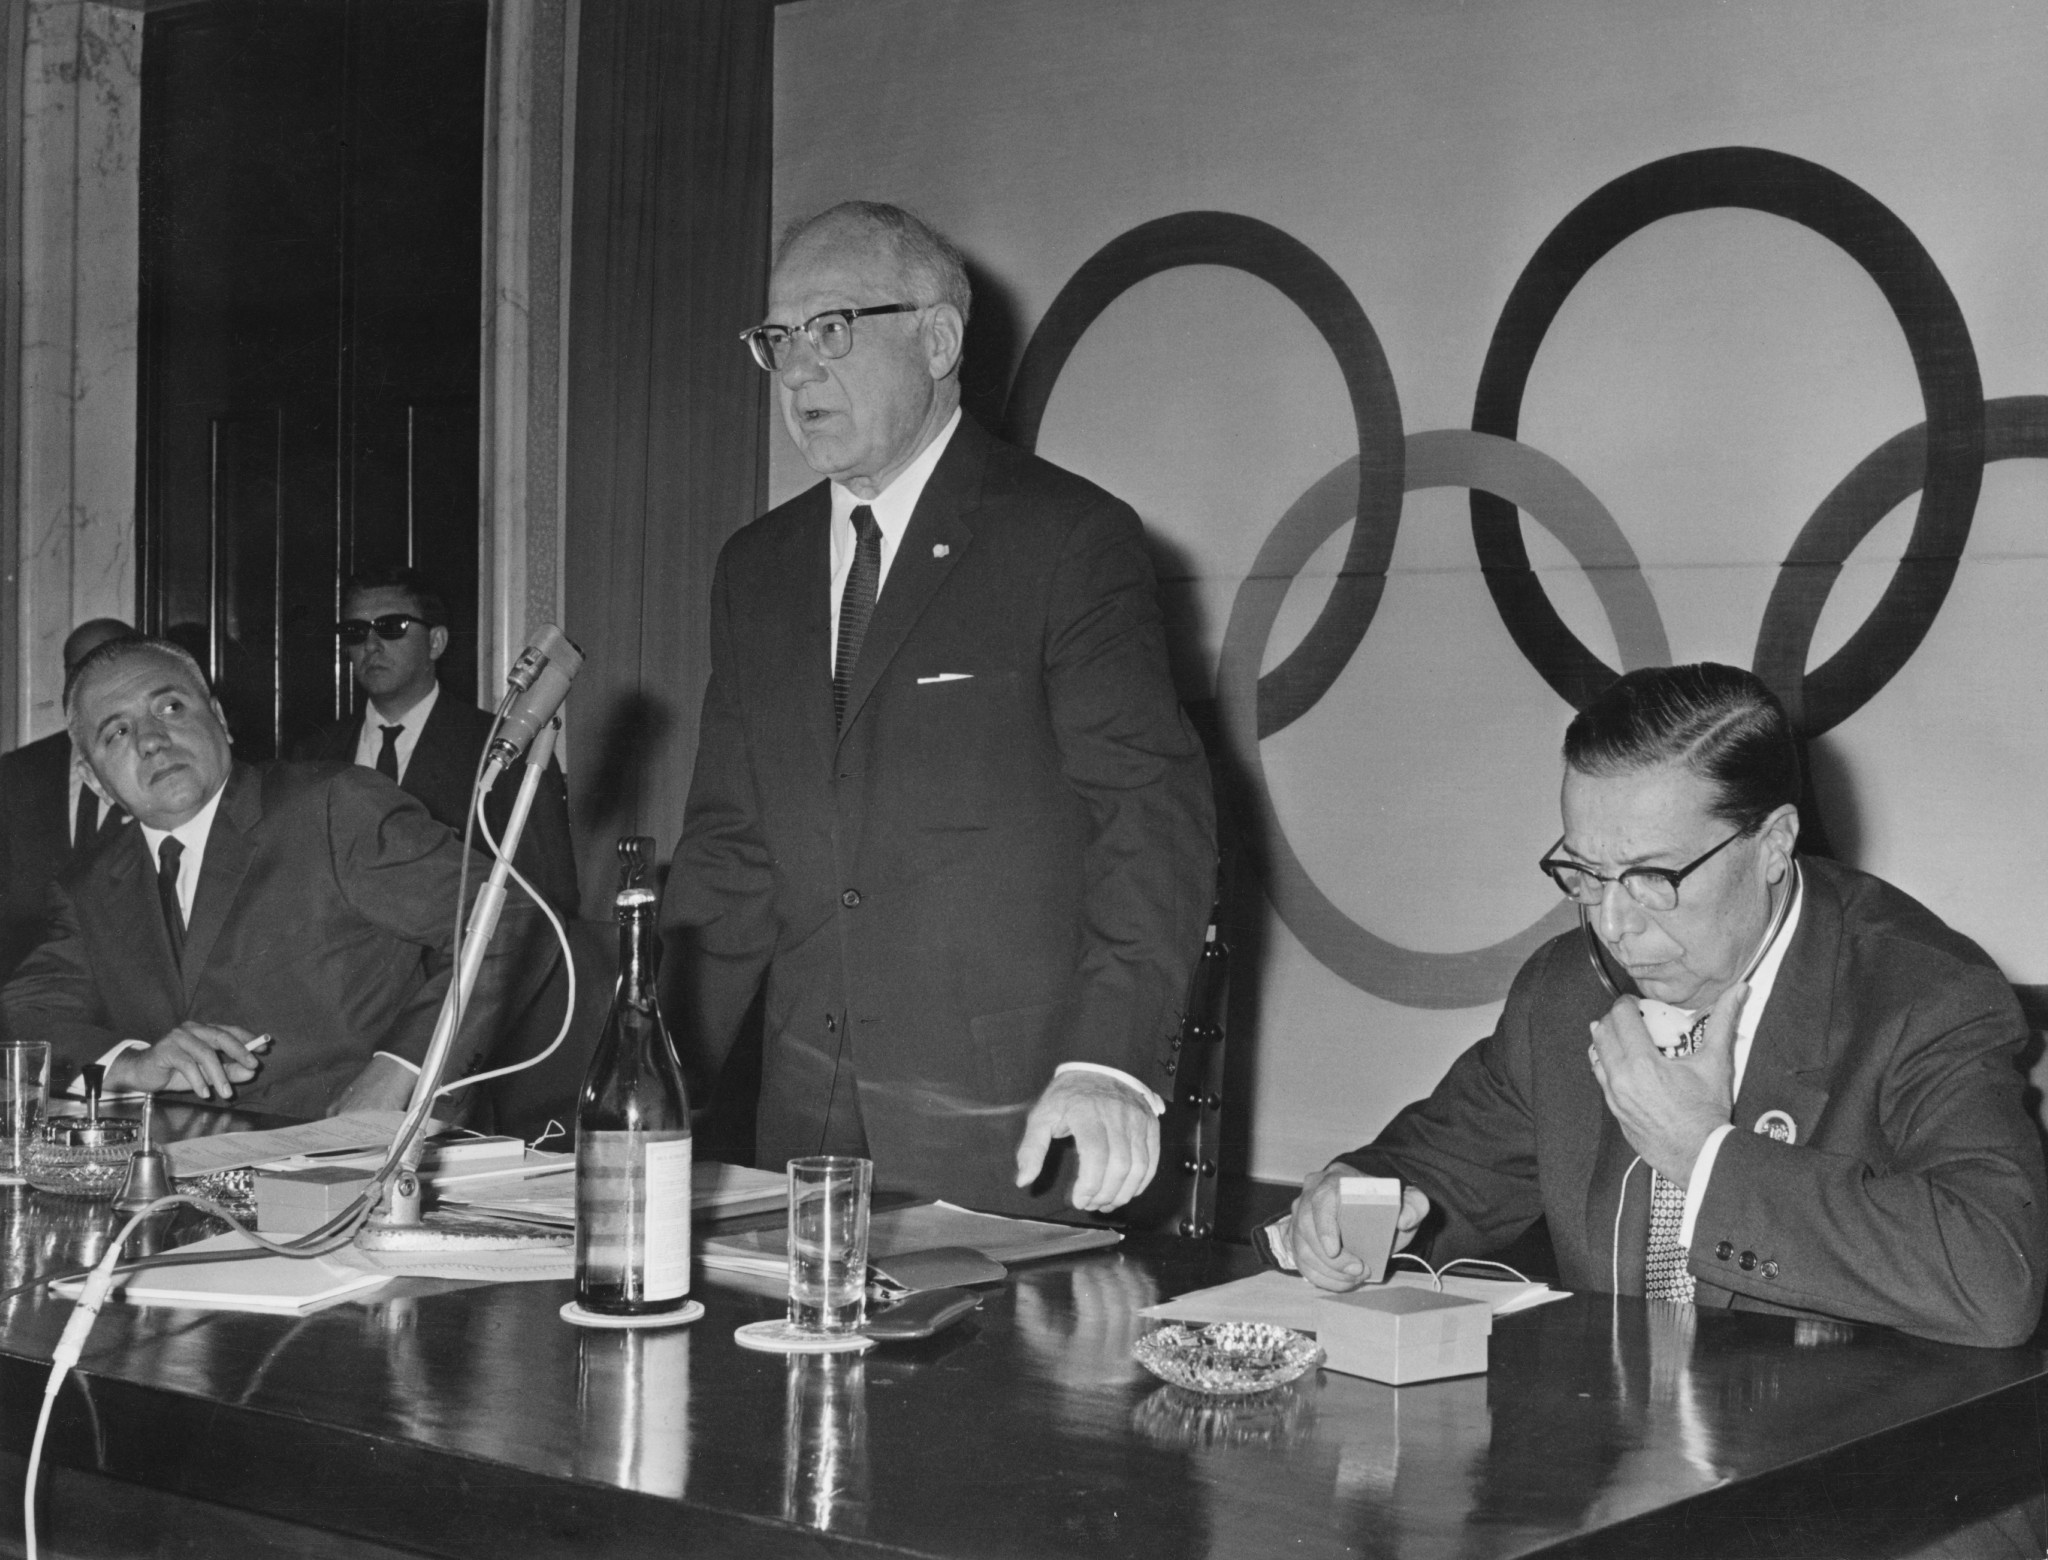 Former IOC President Avery Brundage turned 80 in 1969 ©Getty Images